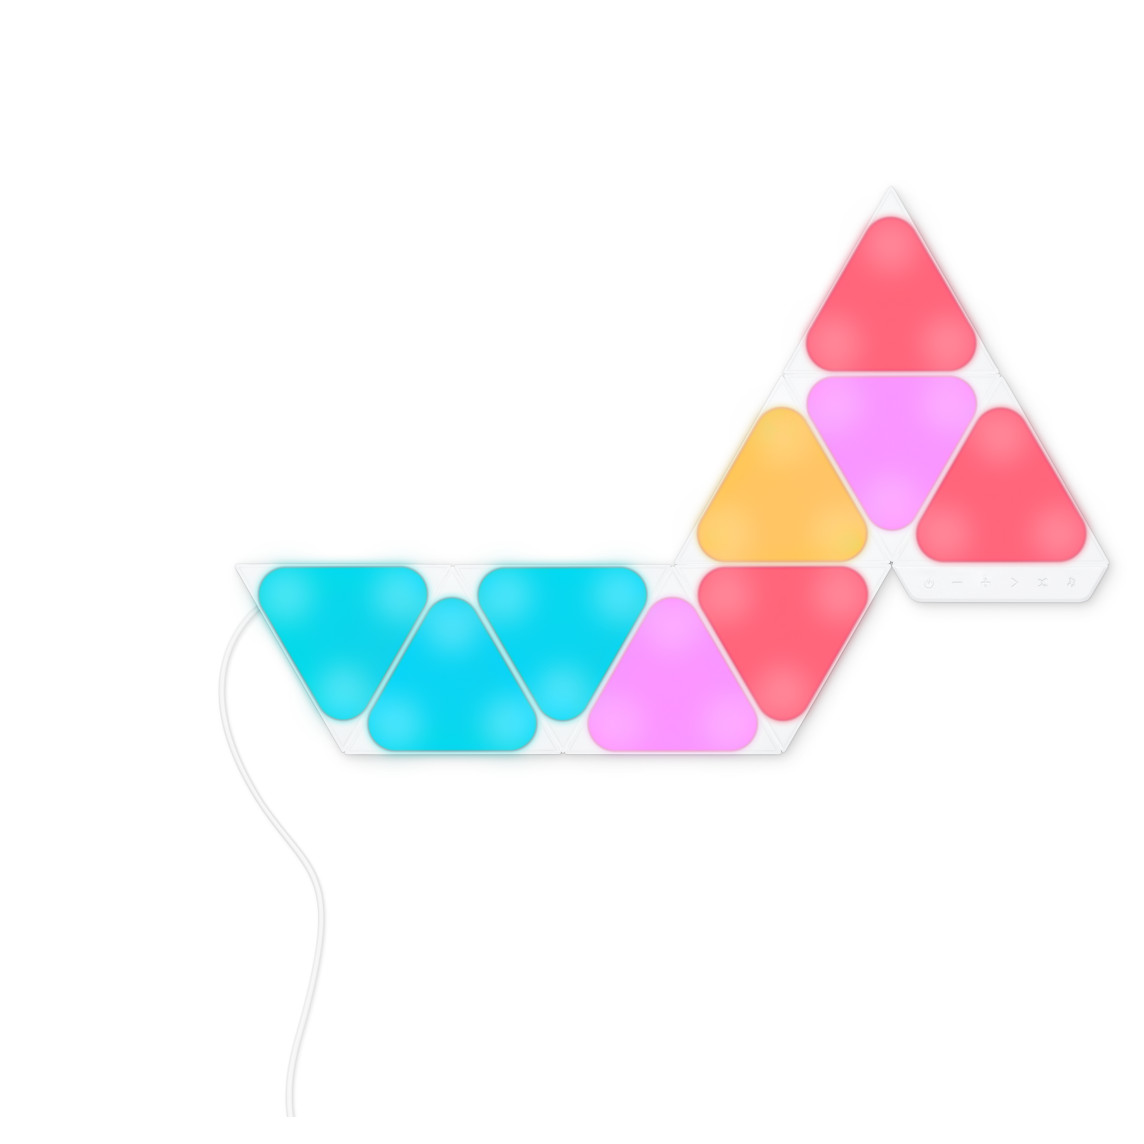 The Nanoleaf Shapes Starter Kit comes with 9 Mini Triangle Panels to create your own multi-colored, wall-mounted accent lighting.